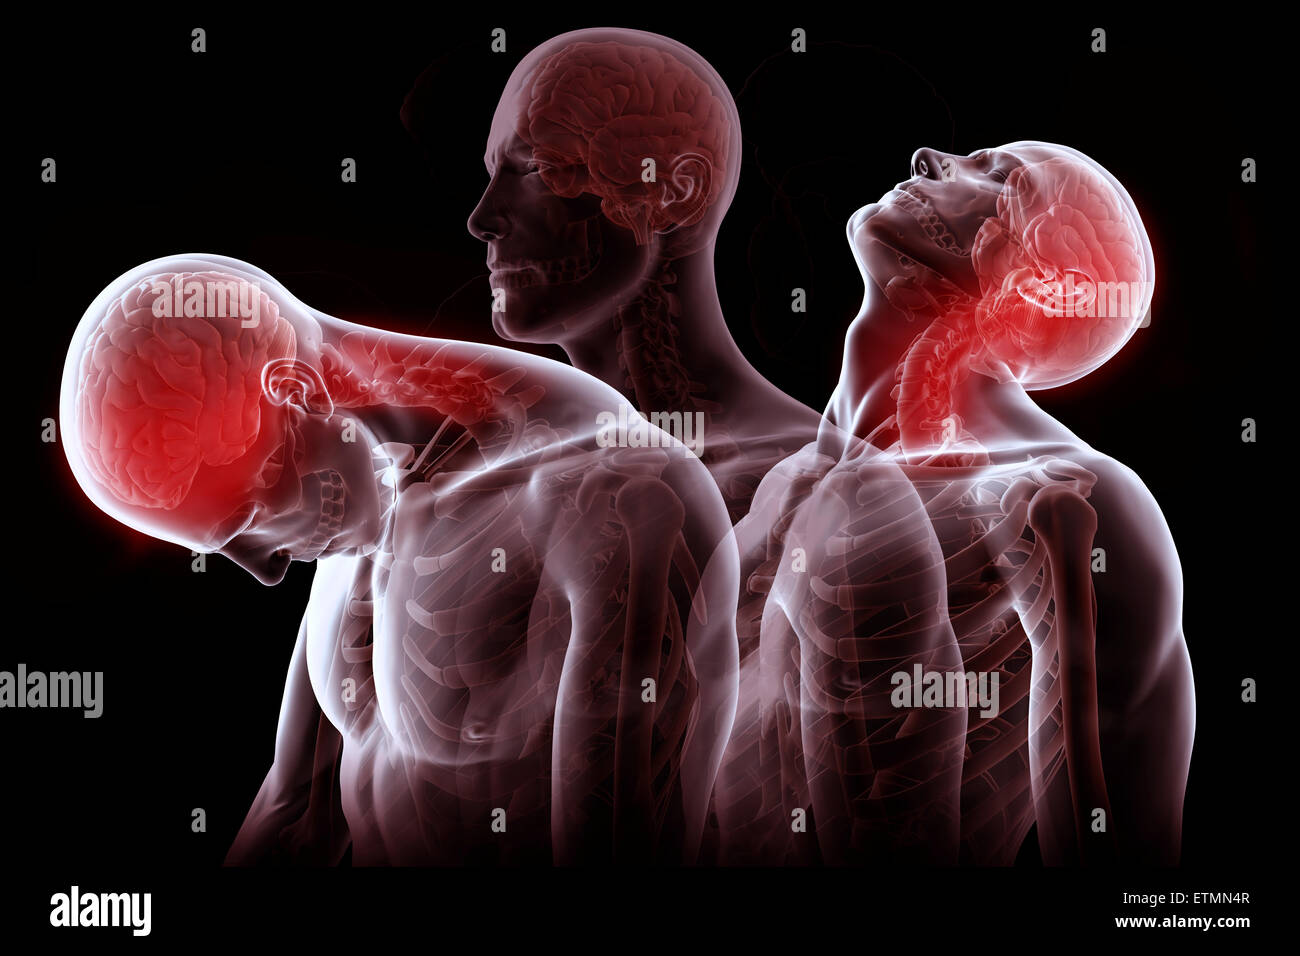 Conceptual illustration showing the stages of motion that cause whiplash: retraction, extension and rebound. Stock Photo